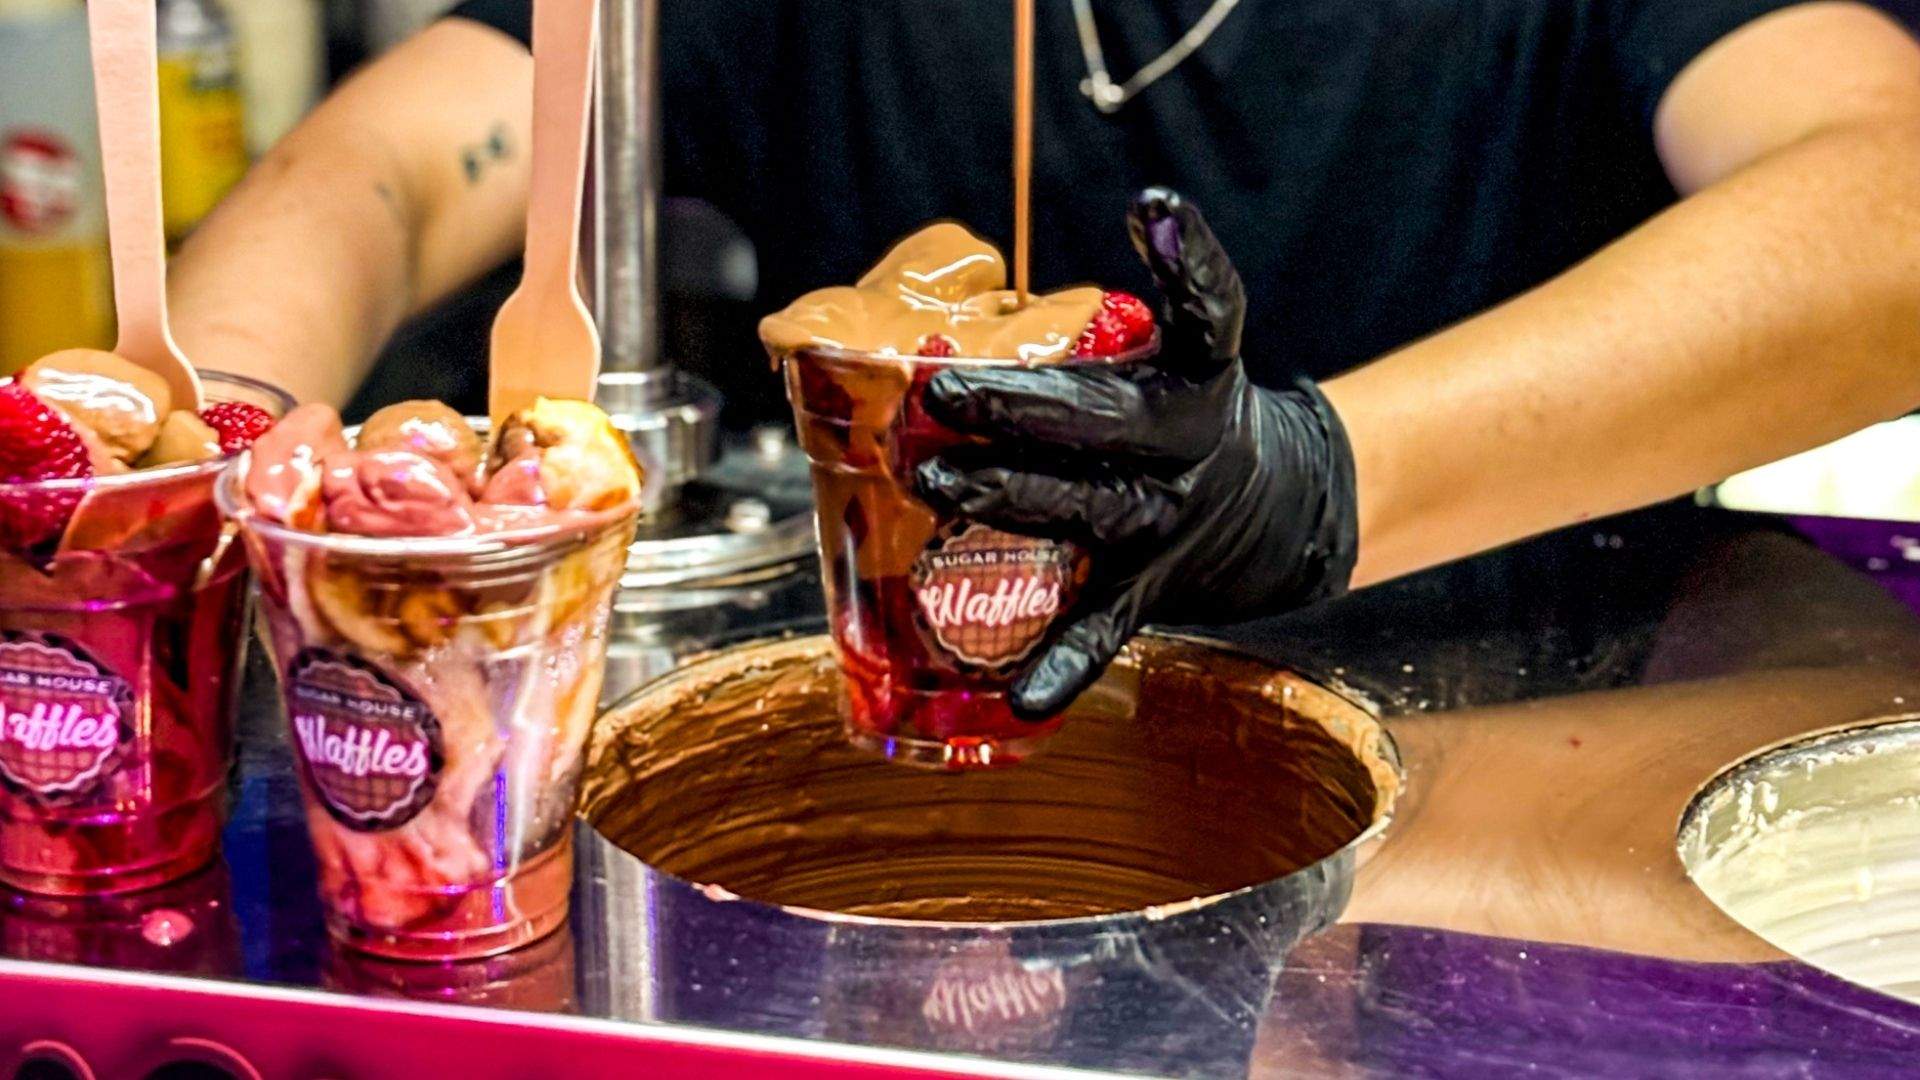 Chocolate pouring onto a strawberry fruit cup available at Spicetown night markets in Sefton.